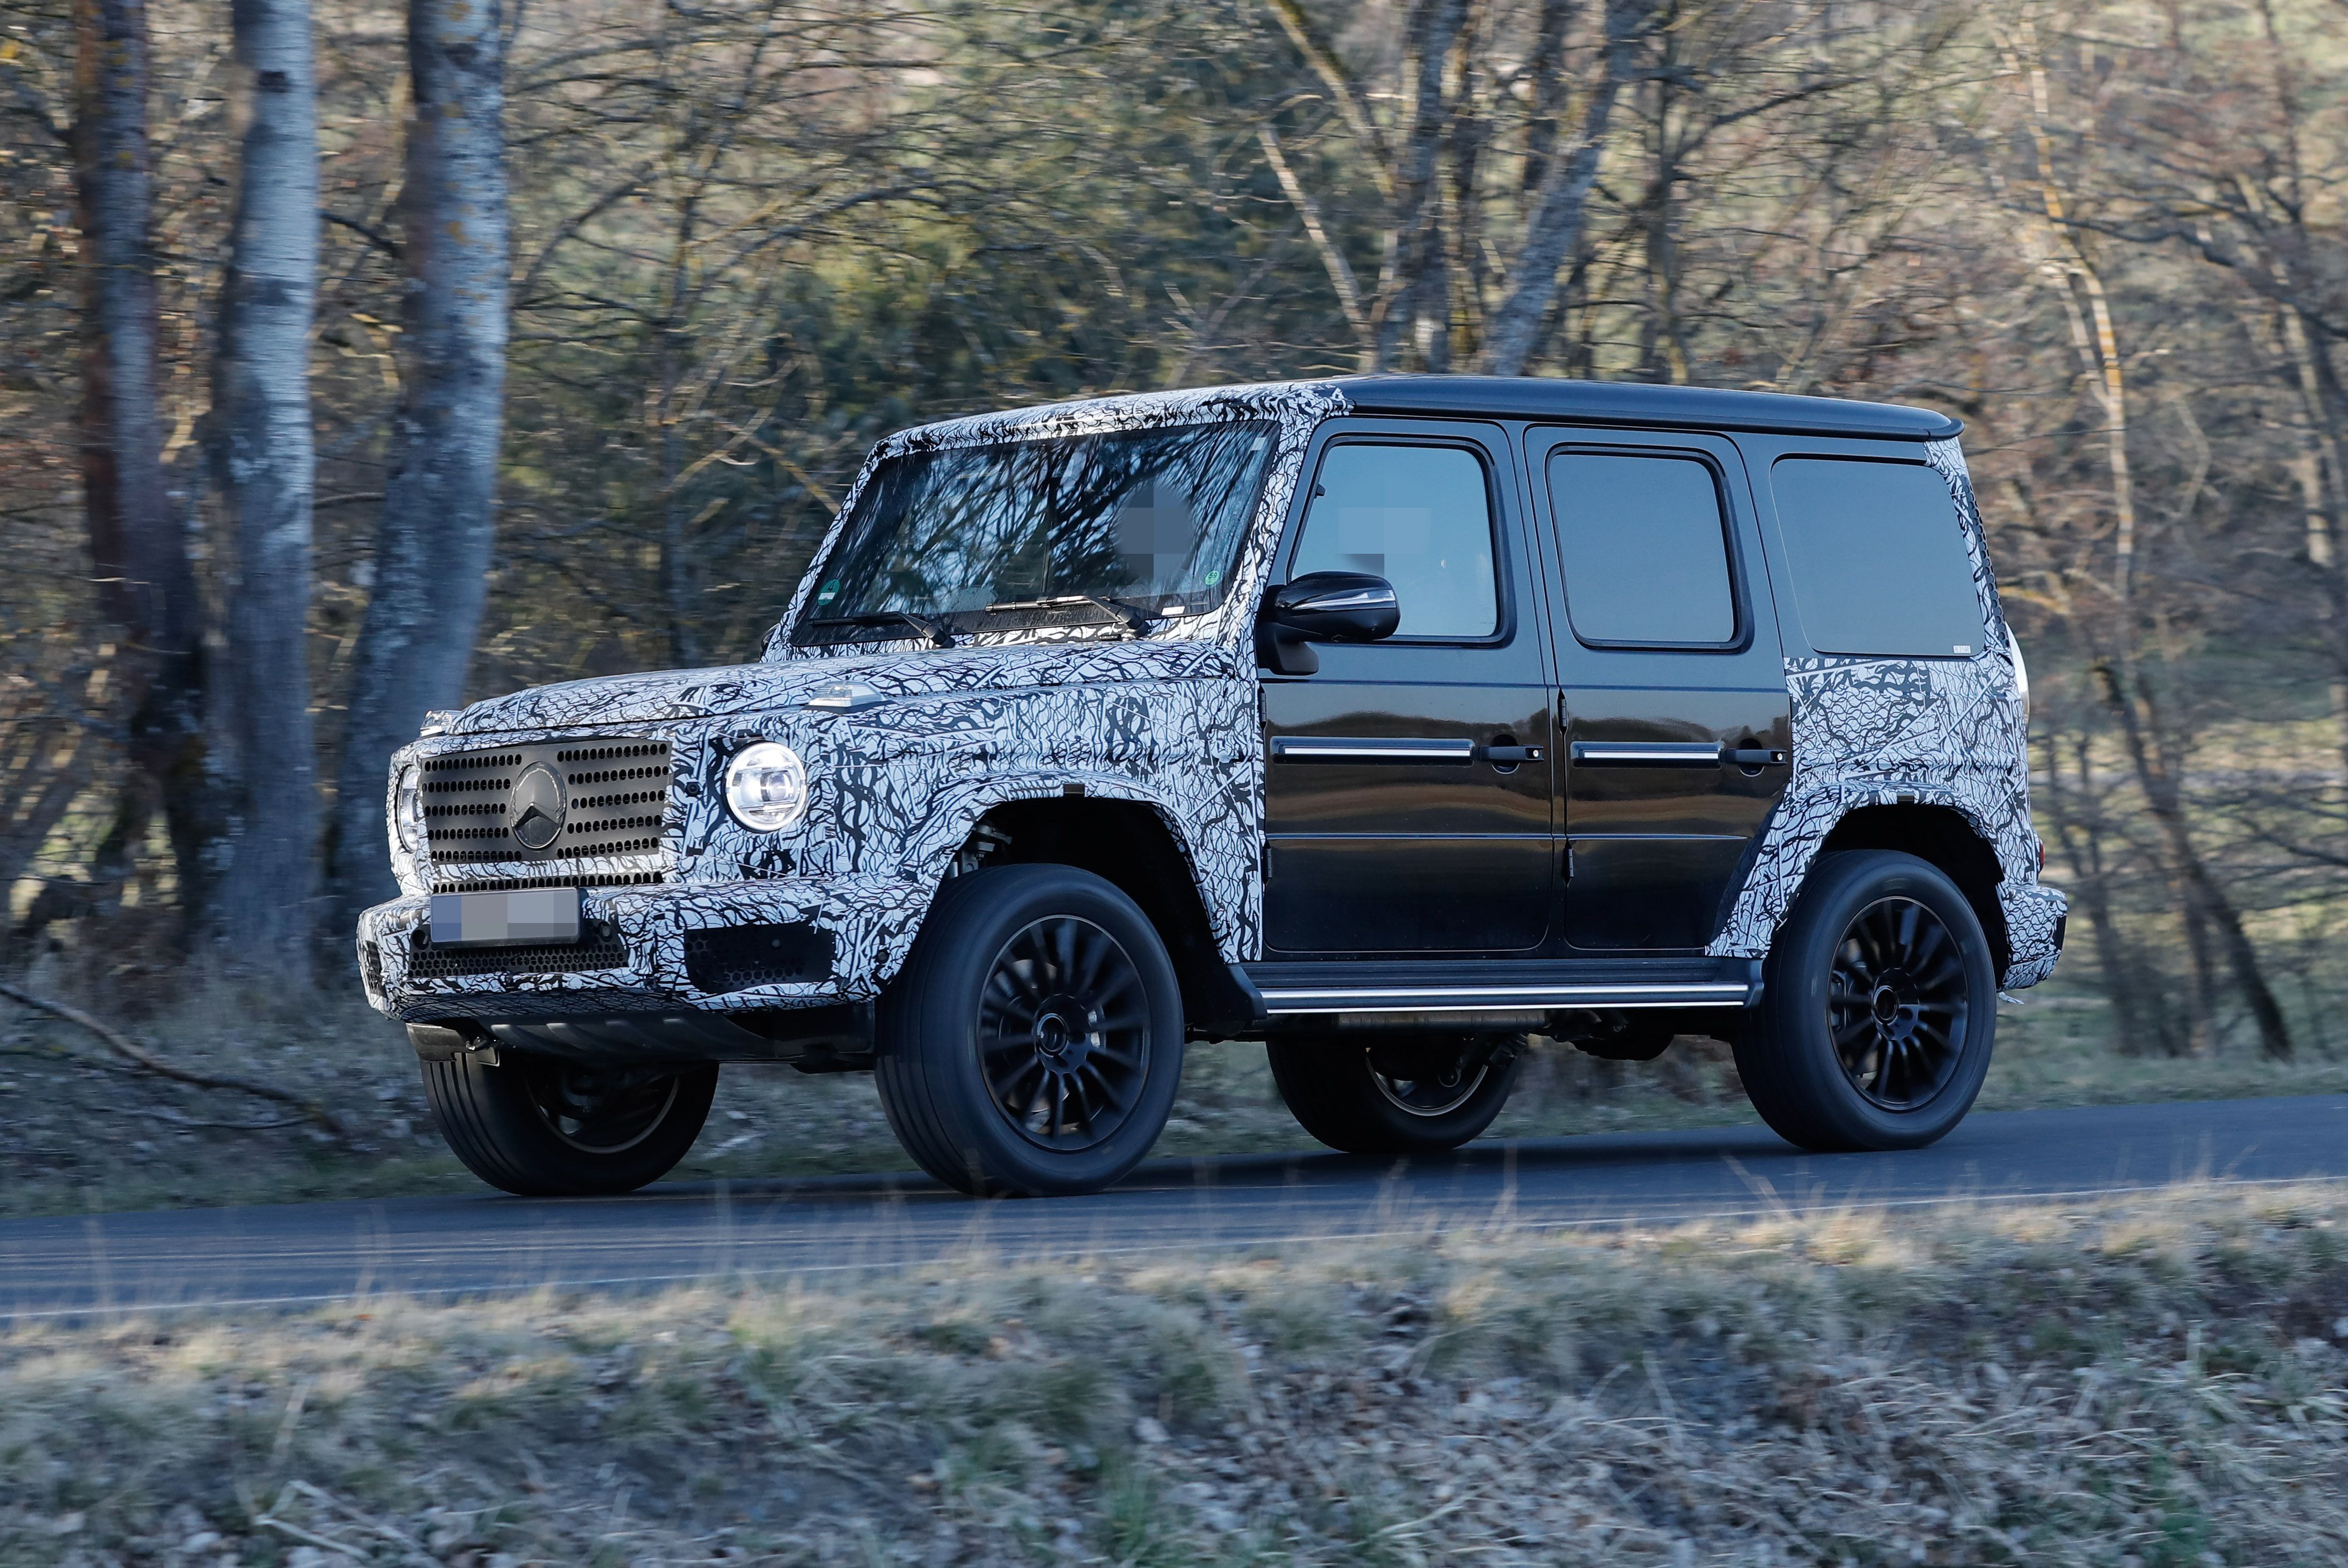 Facelifted 2023 Mercedes G-Class spotted in production bodywork